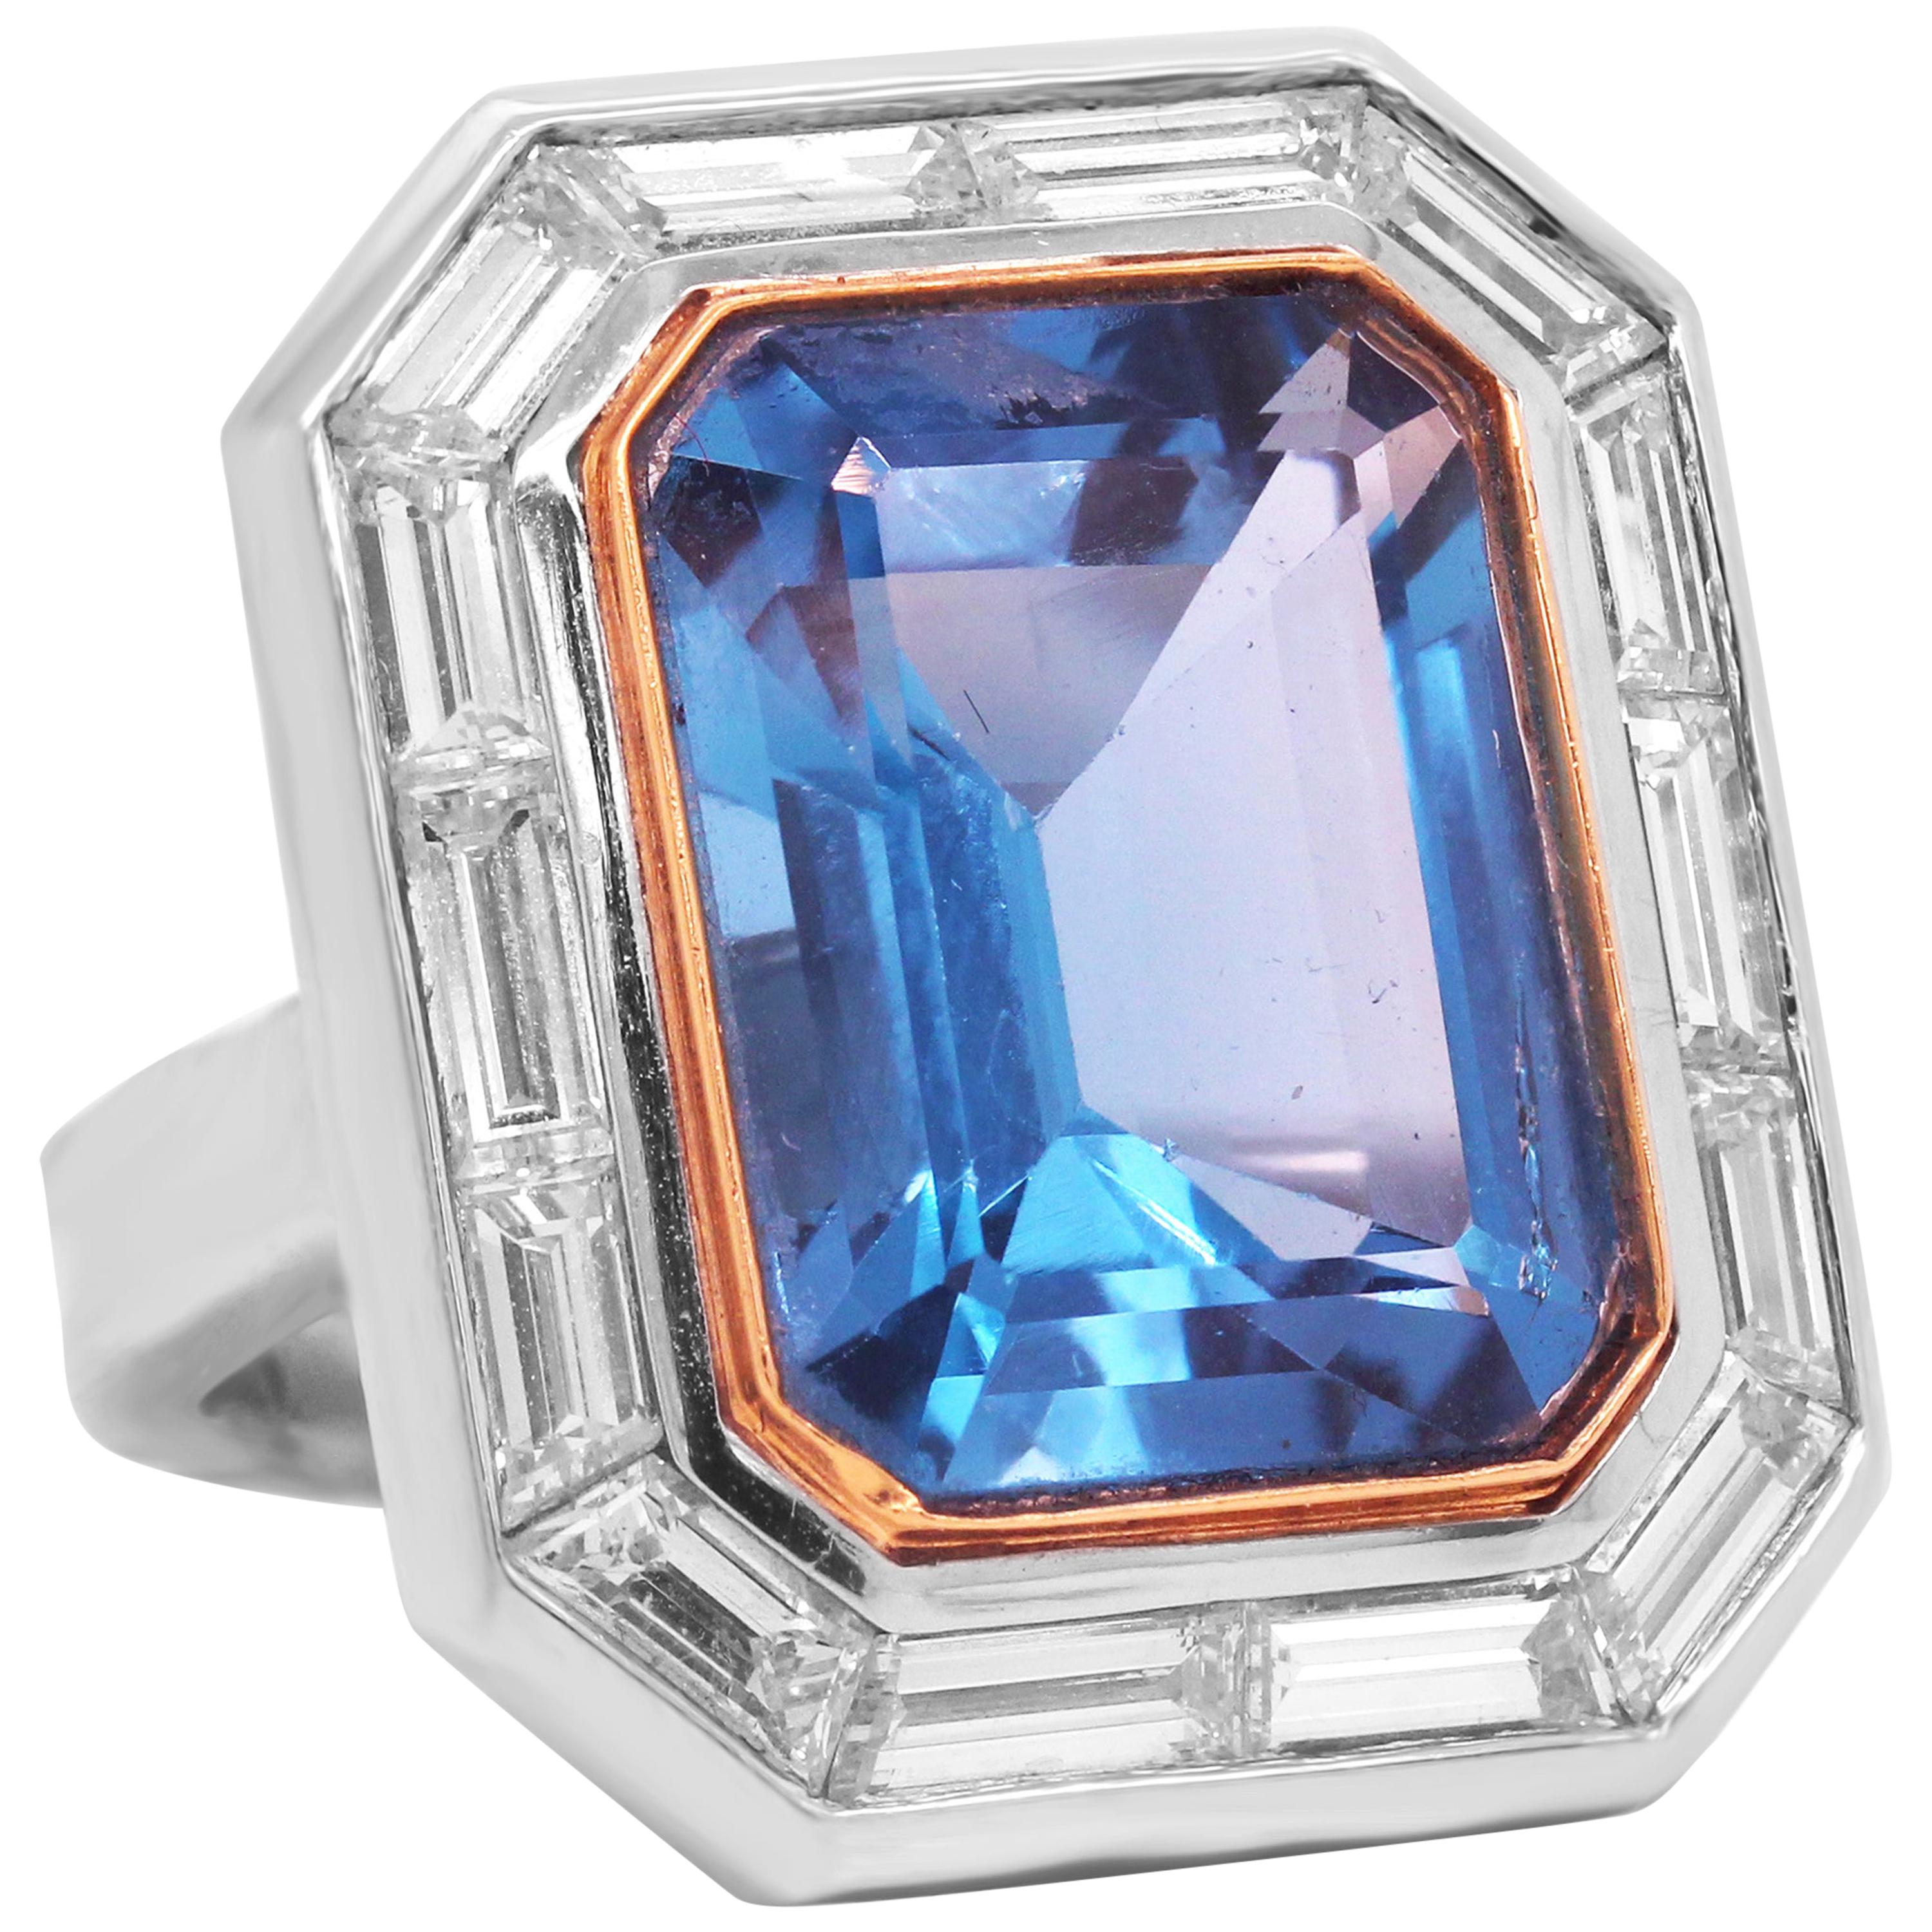 Platinum and Baguette Cut Diamond Ring with Blue Topaz Center